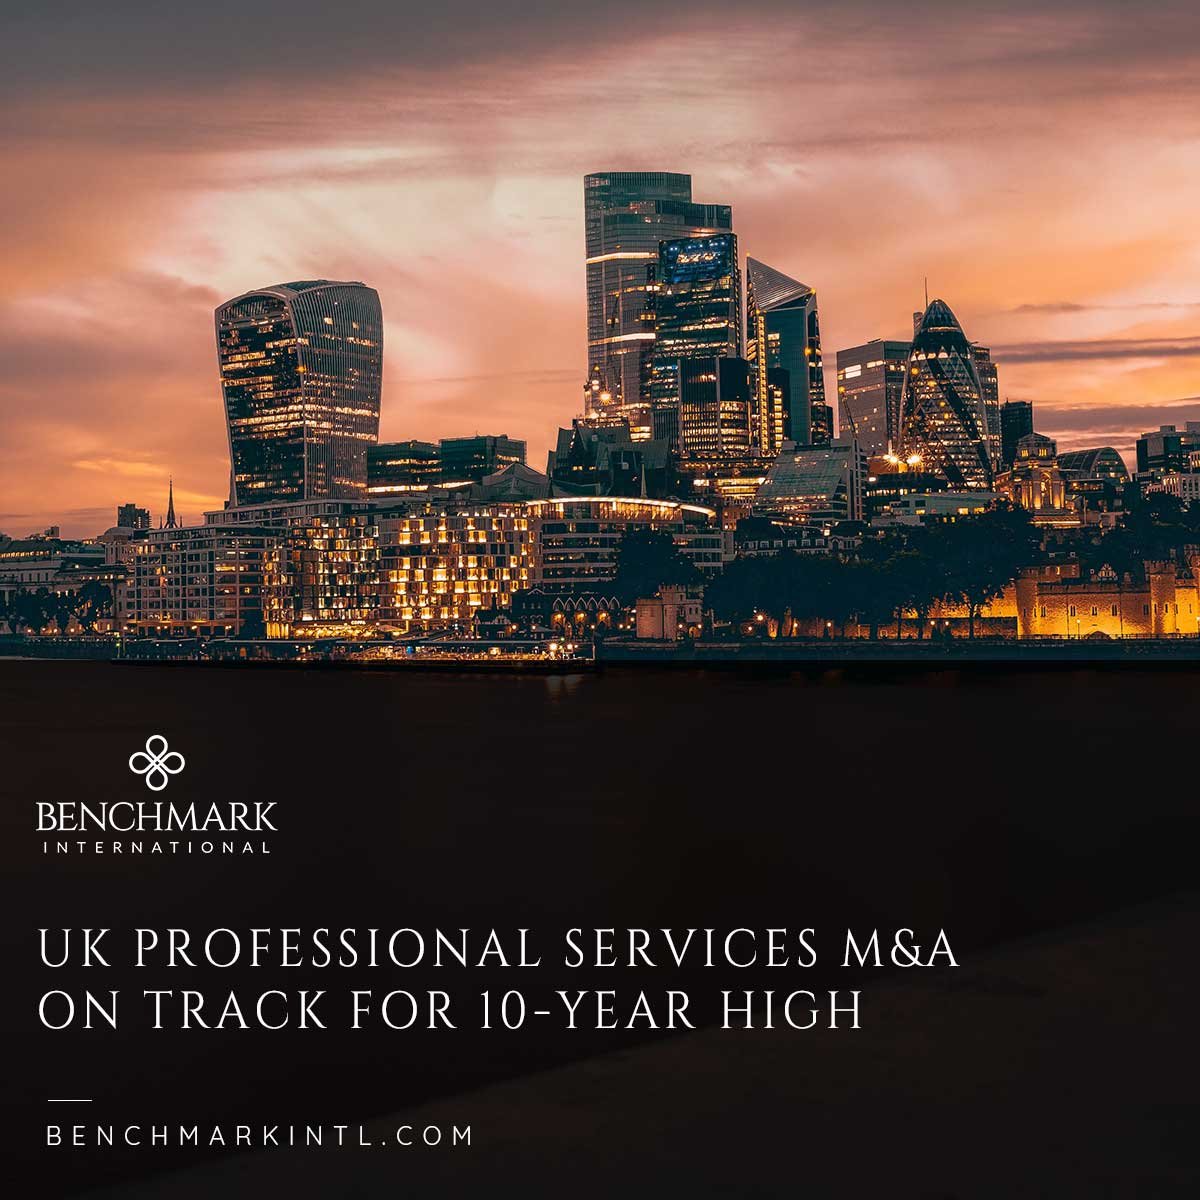 UK Professional Services Sector on Track for 10-Year High